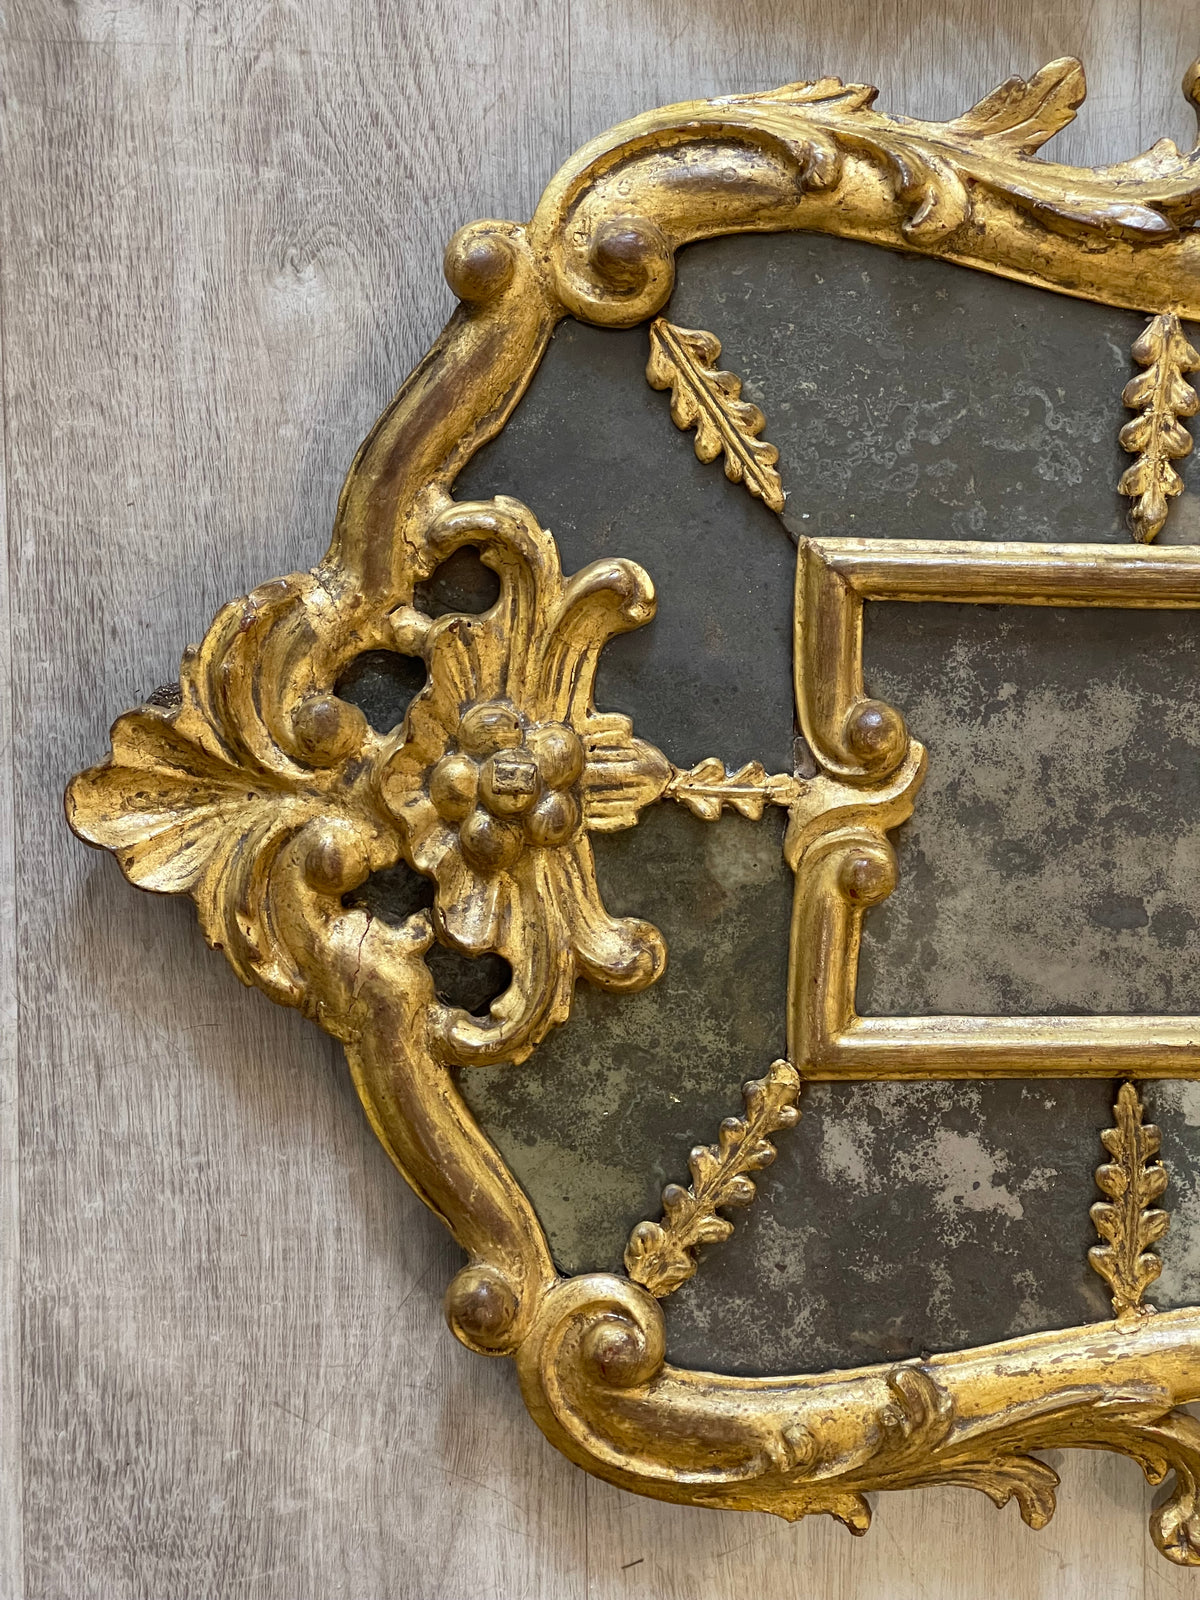 Rare Pair of Carved and Gilded Venetian Mirrors